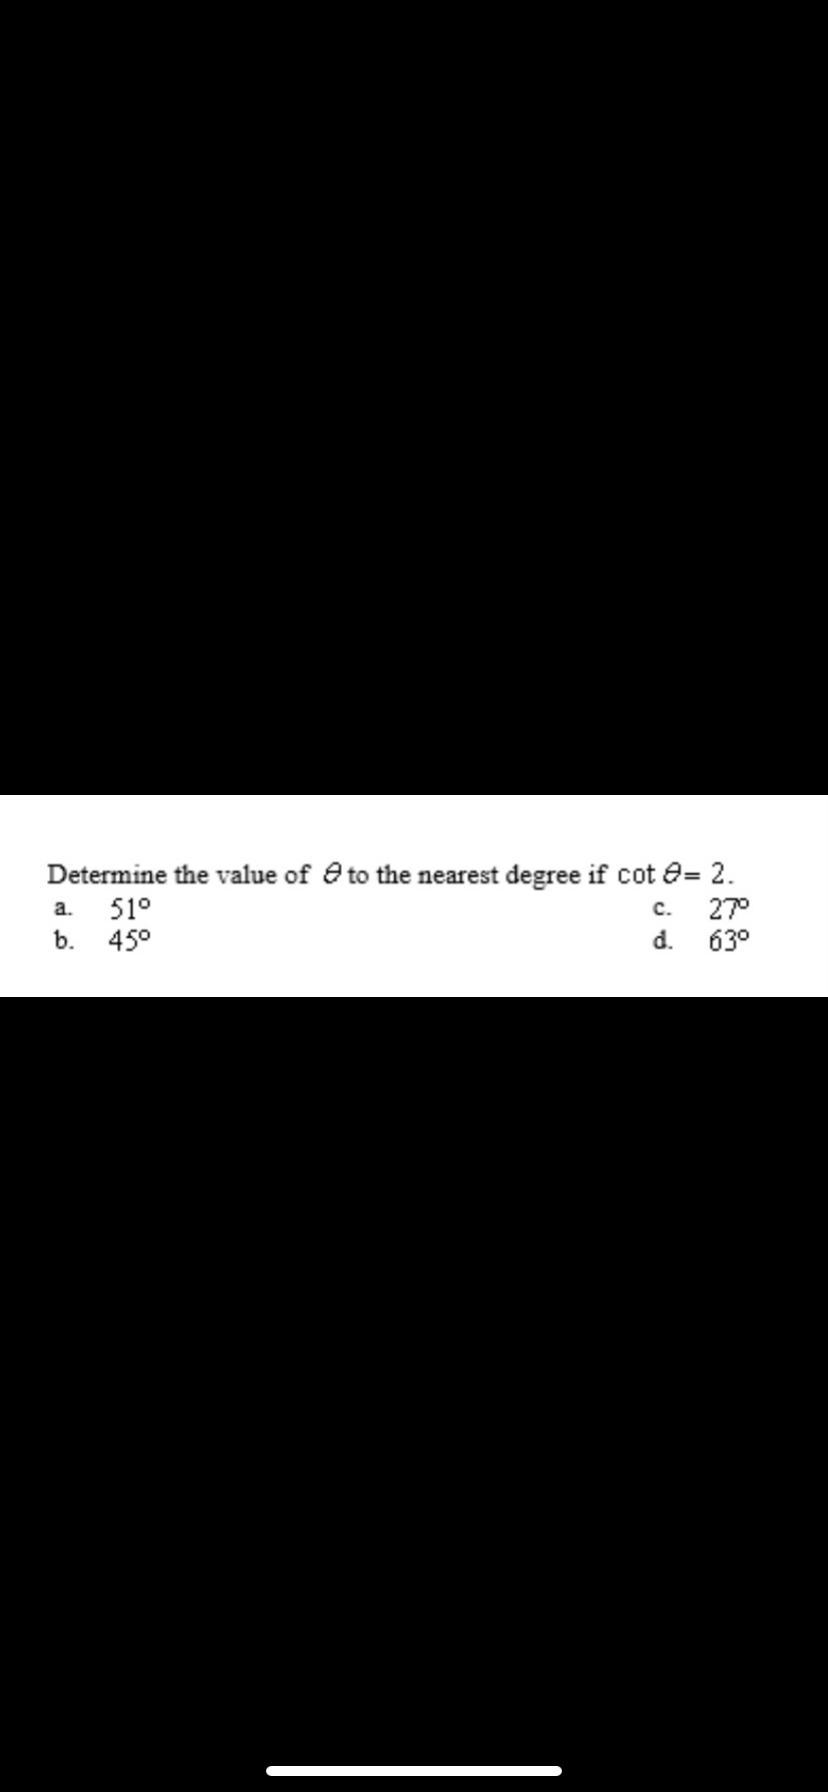 Determine the value of e to the nearest degree if cot e= 2.
51°
b.
27°
63°
a.
с.
45°
d.
